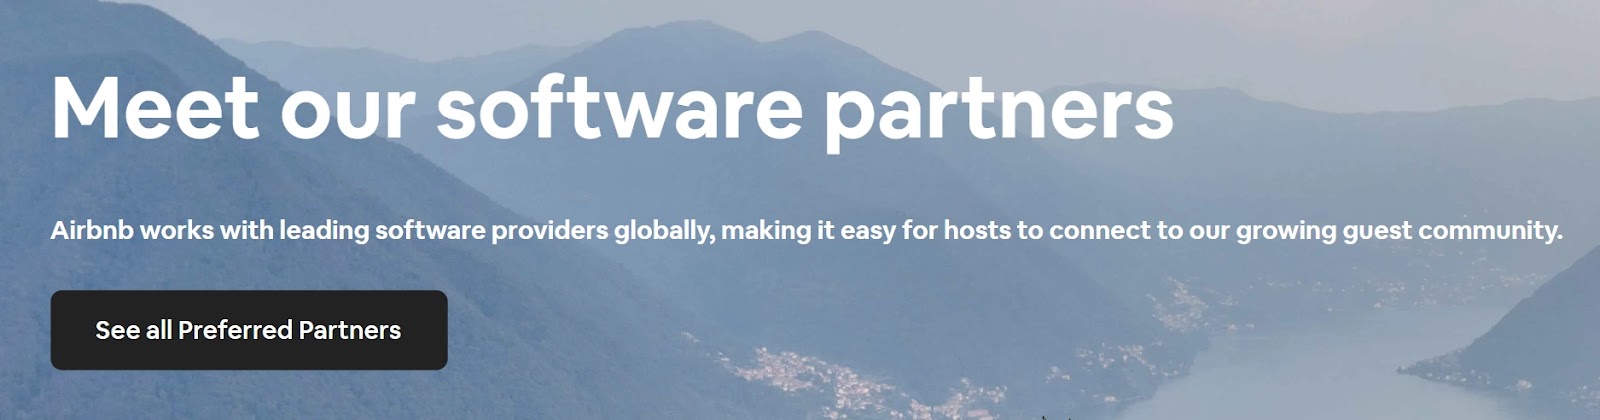 Airbnb software partners